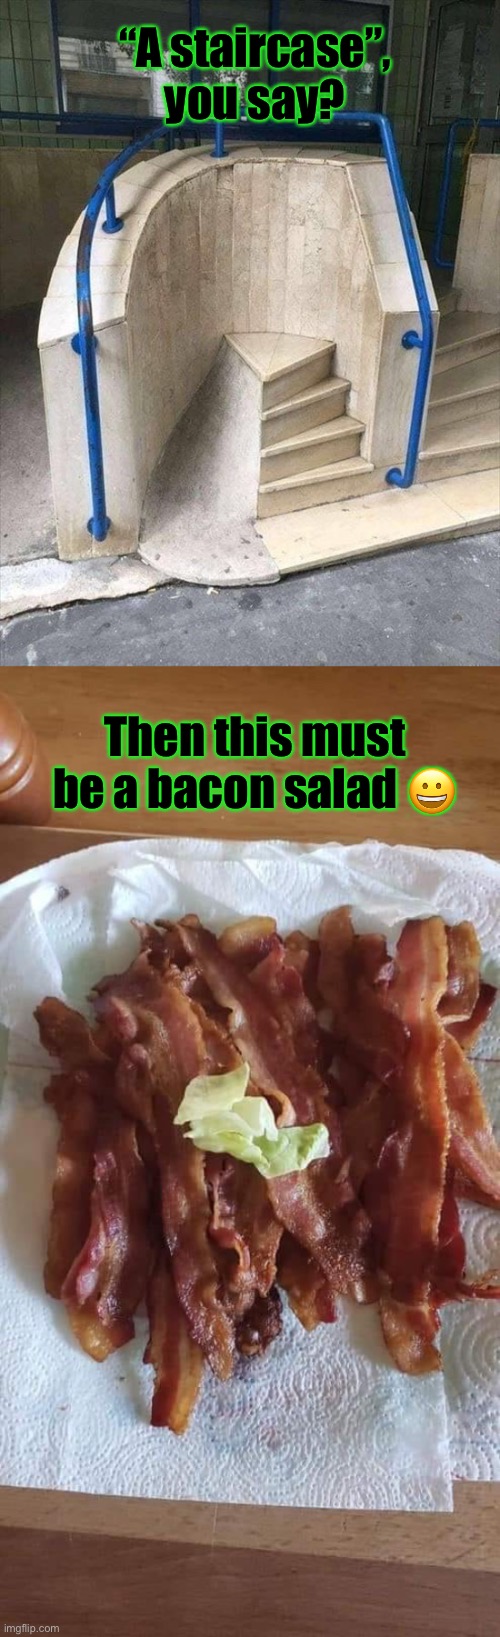 Yeah… idk about that | “A staircase”, you say? Then this must be a bacon salad 😀 | image tagged in bacon salad | made w/ Imgflip meme maker